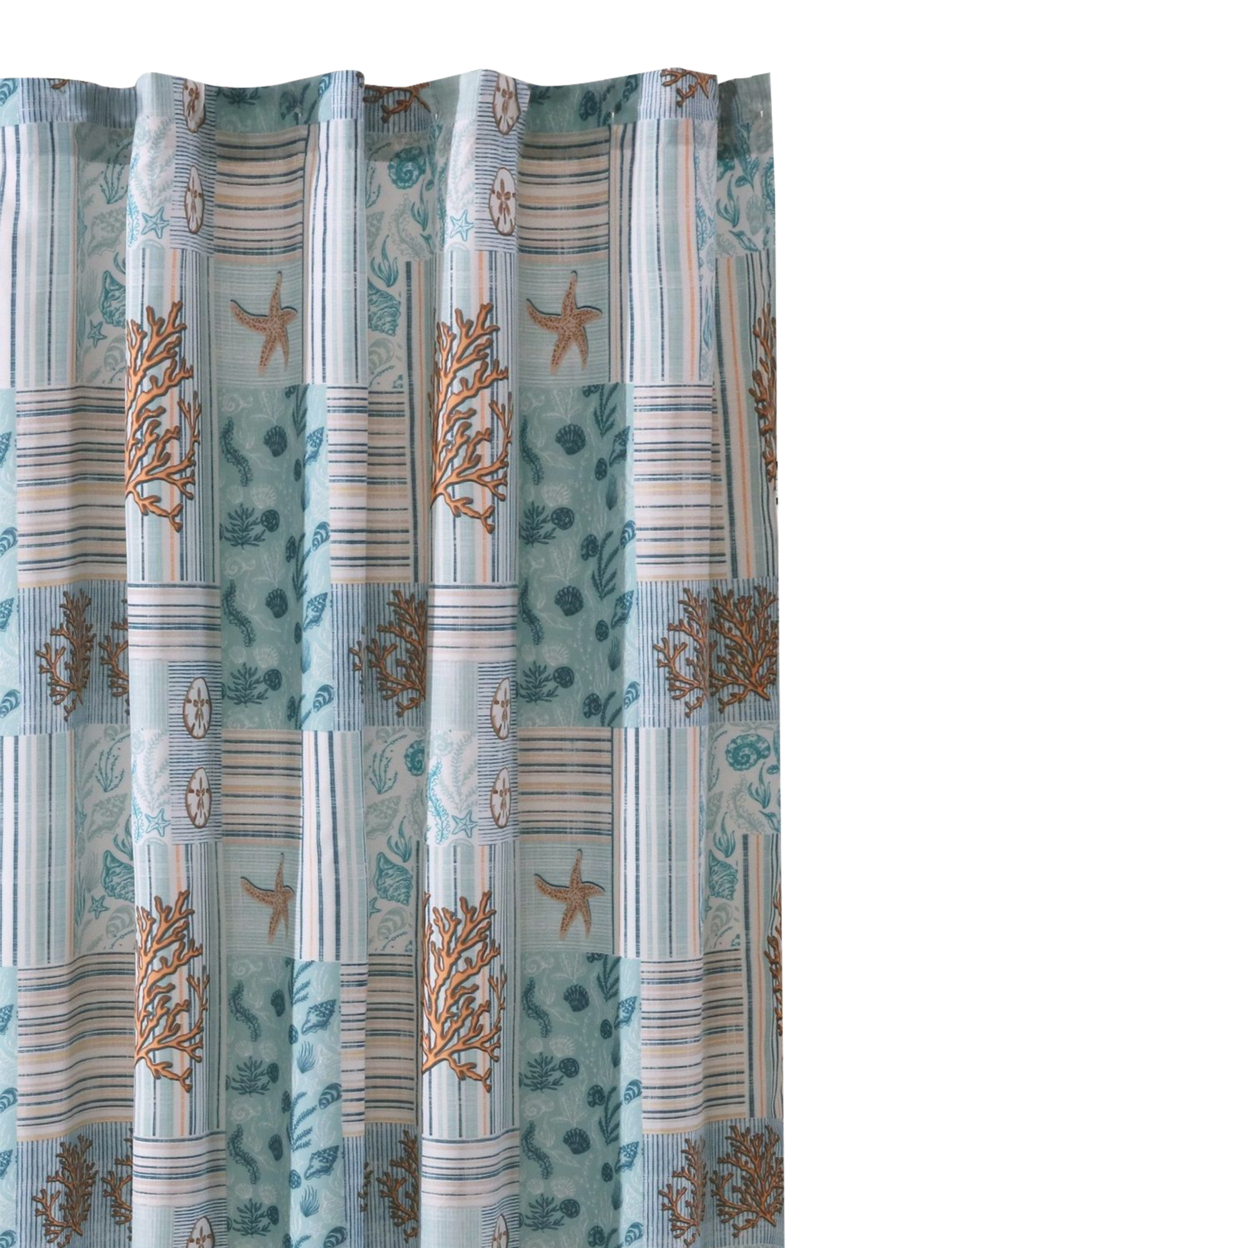 Sea Life Print Shower Curtain With Button Holes, Blue And Brown